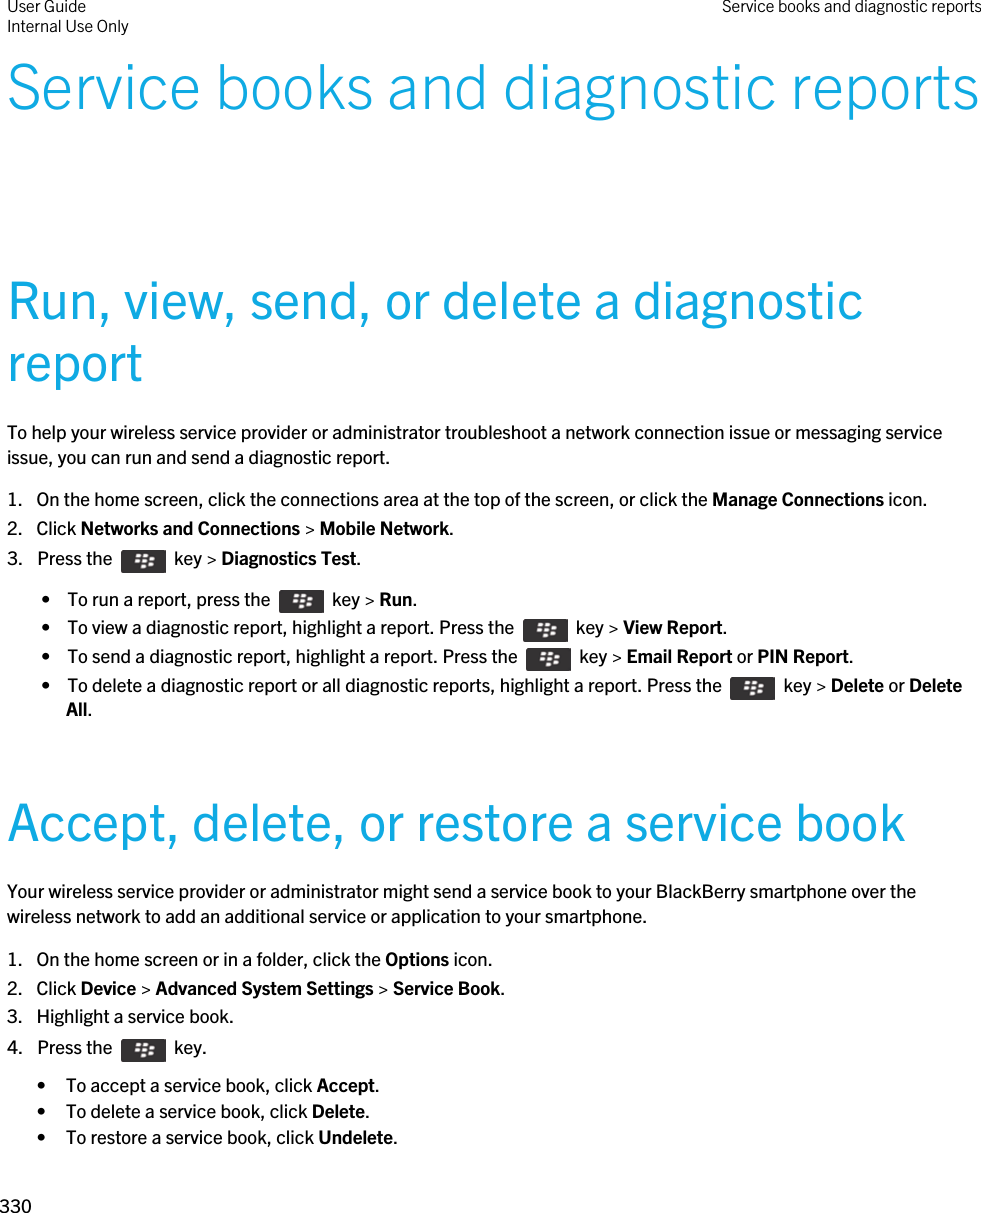 Service books and diagnostic reportsRun, view, send, or delete a diagnostic reportTo help your wireless service provider or administrator troubleshoot a network connection issue or messaging service issue, you can run and send a diagnostic report.1. On the home screen, click the connections area at the top of the screen, or click the Manage Connections icon.2. Click Networks and Connections &gt; Mobile Network.3.  Press the    key &gt; Diagnostics Test.  •  To run a report, press the    key &gt; Run. •  To view a diagnostic report, highlight a report. Press the    key &gt; View Report. •  To send a diagnostic report, highlight a report. Press the    key &gt; Email Report or PIN Report. •  To delete a diagnostic report or all diagnostic reports, highlight a report. Press the    key &gt; Delete or Delete All.Accept, delete, or restore a service bookYour wireless service provider or administrator might send a service book to your BlackBerry smartphone over the wireless network to add an additional service or application to your smartphone.1. On the home screen or in a folder, click the Options icon.2. Click Device &gt; Advanced System Settings &gt; Service Book.3. Highlight a service book.4.  Press the    key. • To accept a service book, click Accept.• To delete a service book, click Delete.• To restore a service book, click Undelete.User GuideInternal Use Only Service books and diagnostic reports330 